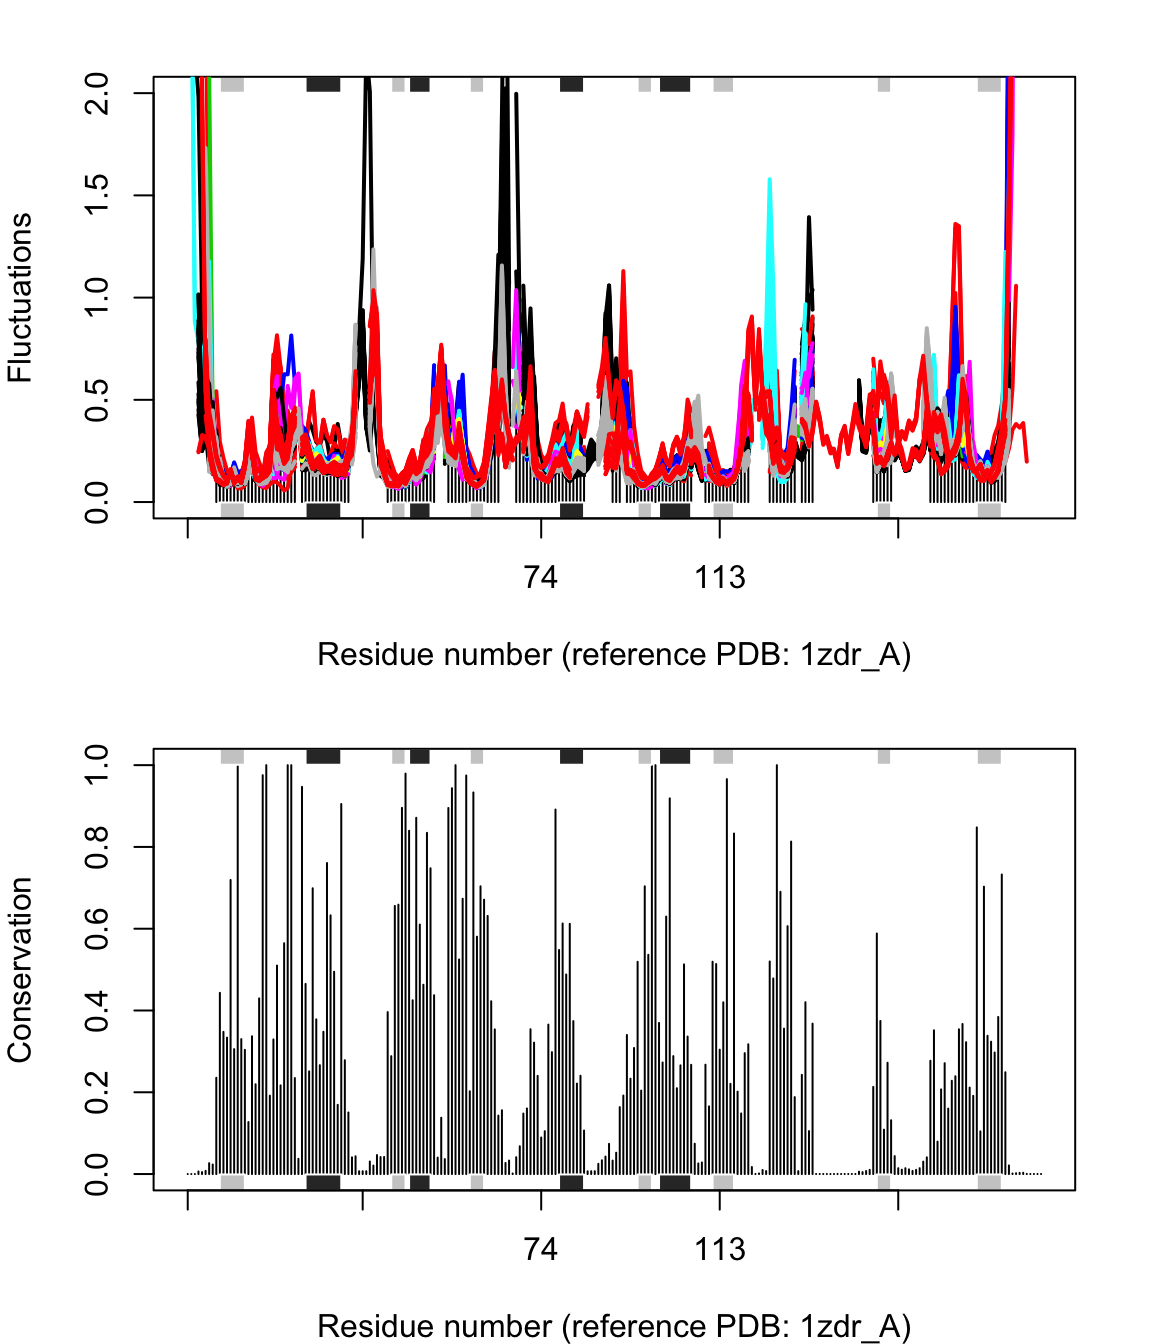 Flexibility profiles and sequence conservation. The figure shows the modes fluctuations colored according their sequence identity. The lower panel shows the sequence conservation for the PDBs. The plot is generated with function **plot.enma()** along with function call to **conerv()**.